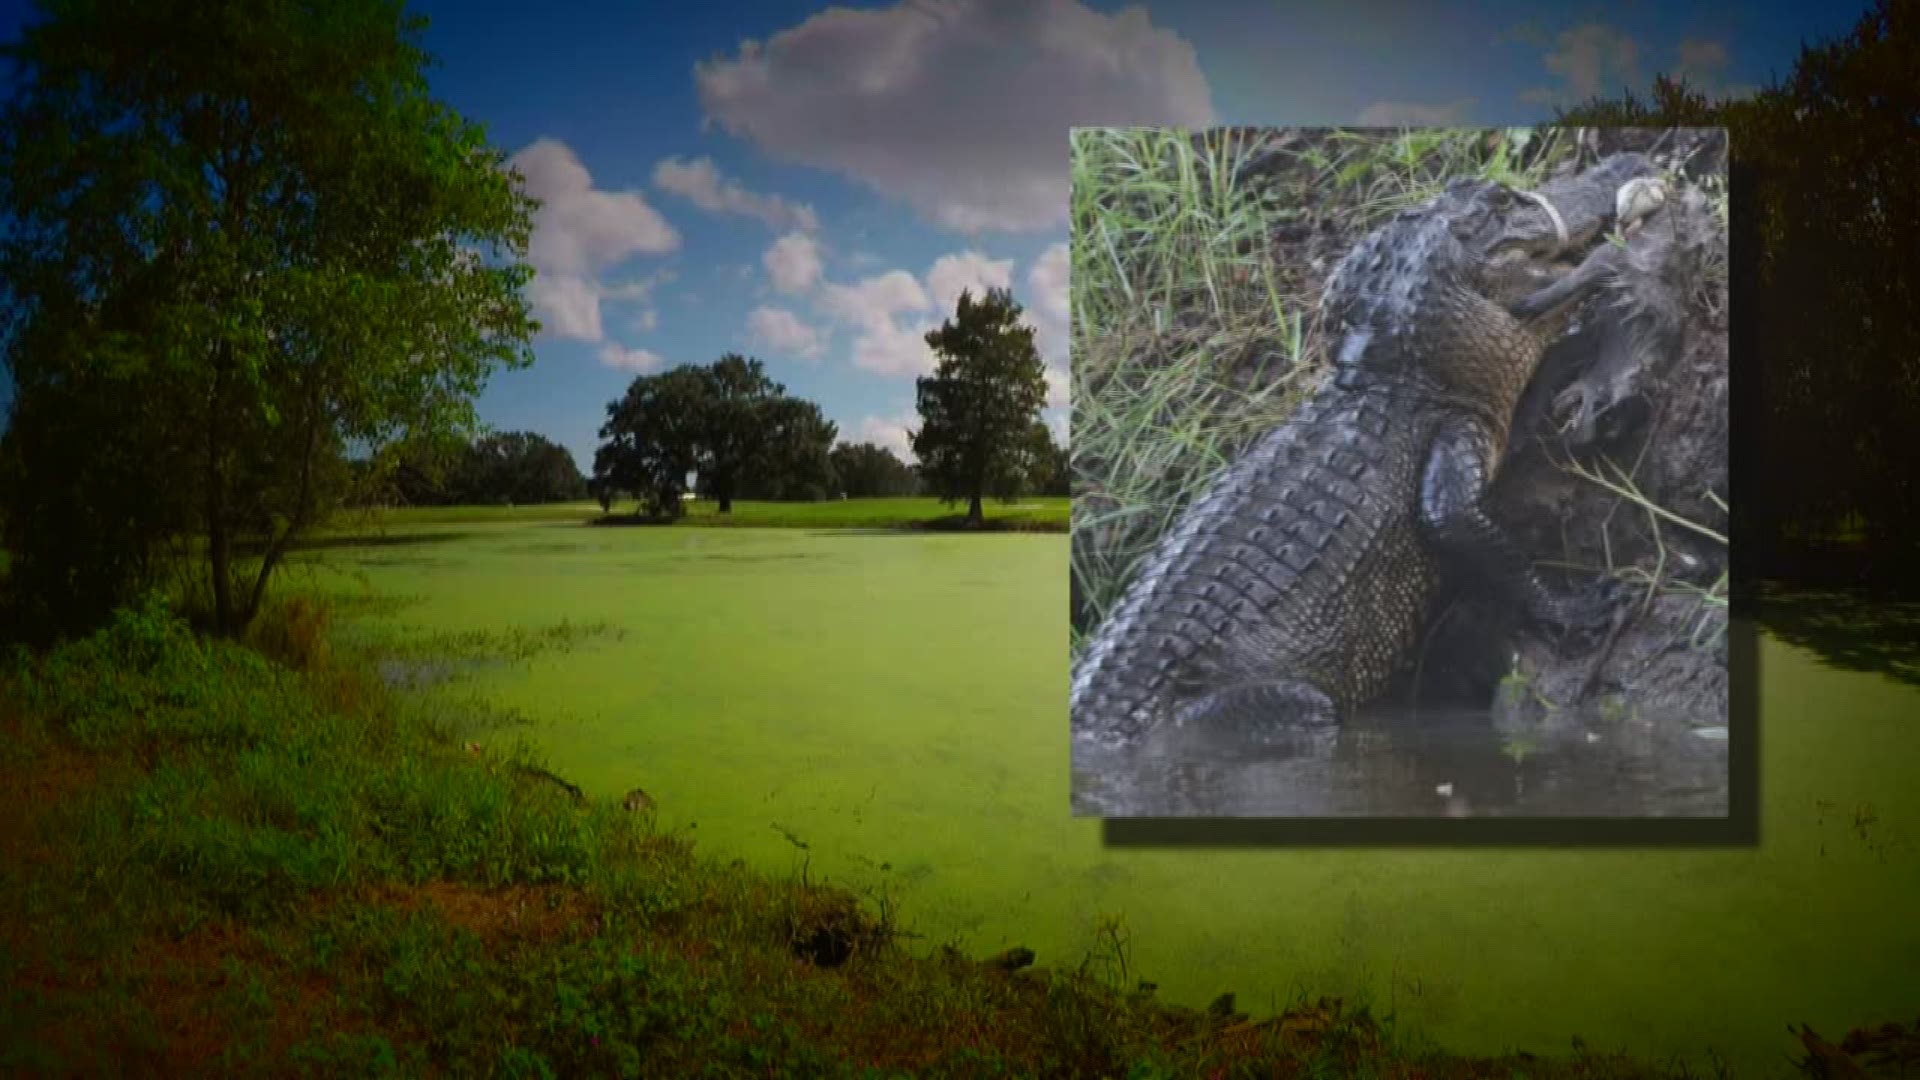 Alligator spotted at City Park lagoon 